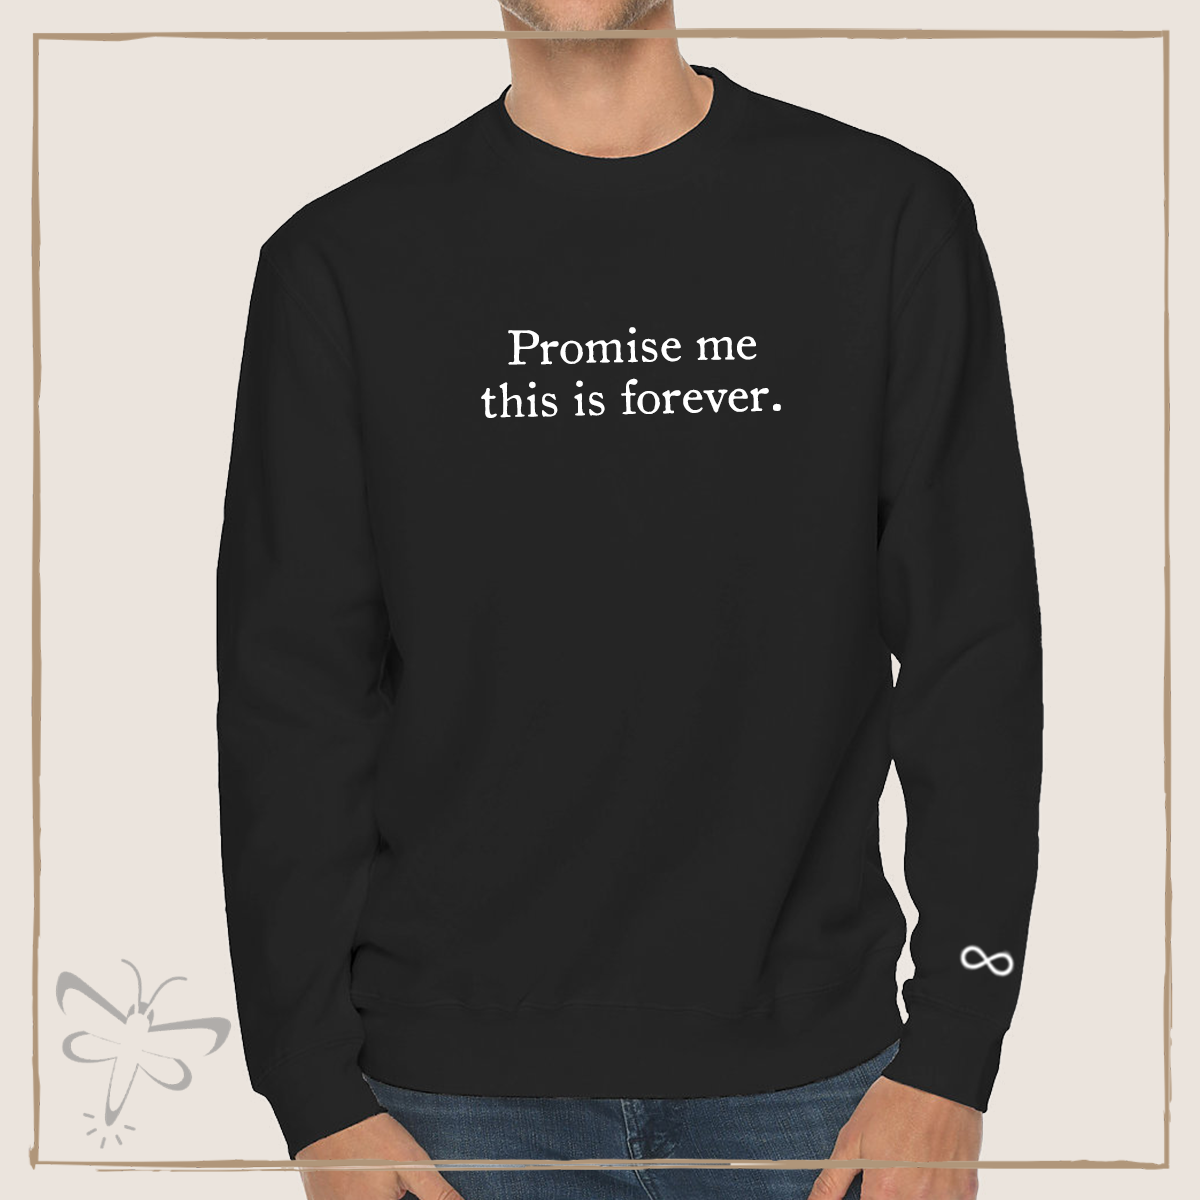 Promise me this is forever. Crewneck - The Vampire Diaries Inspired